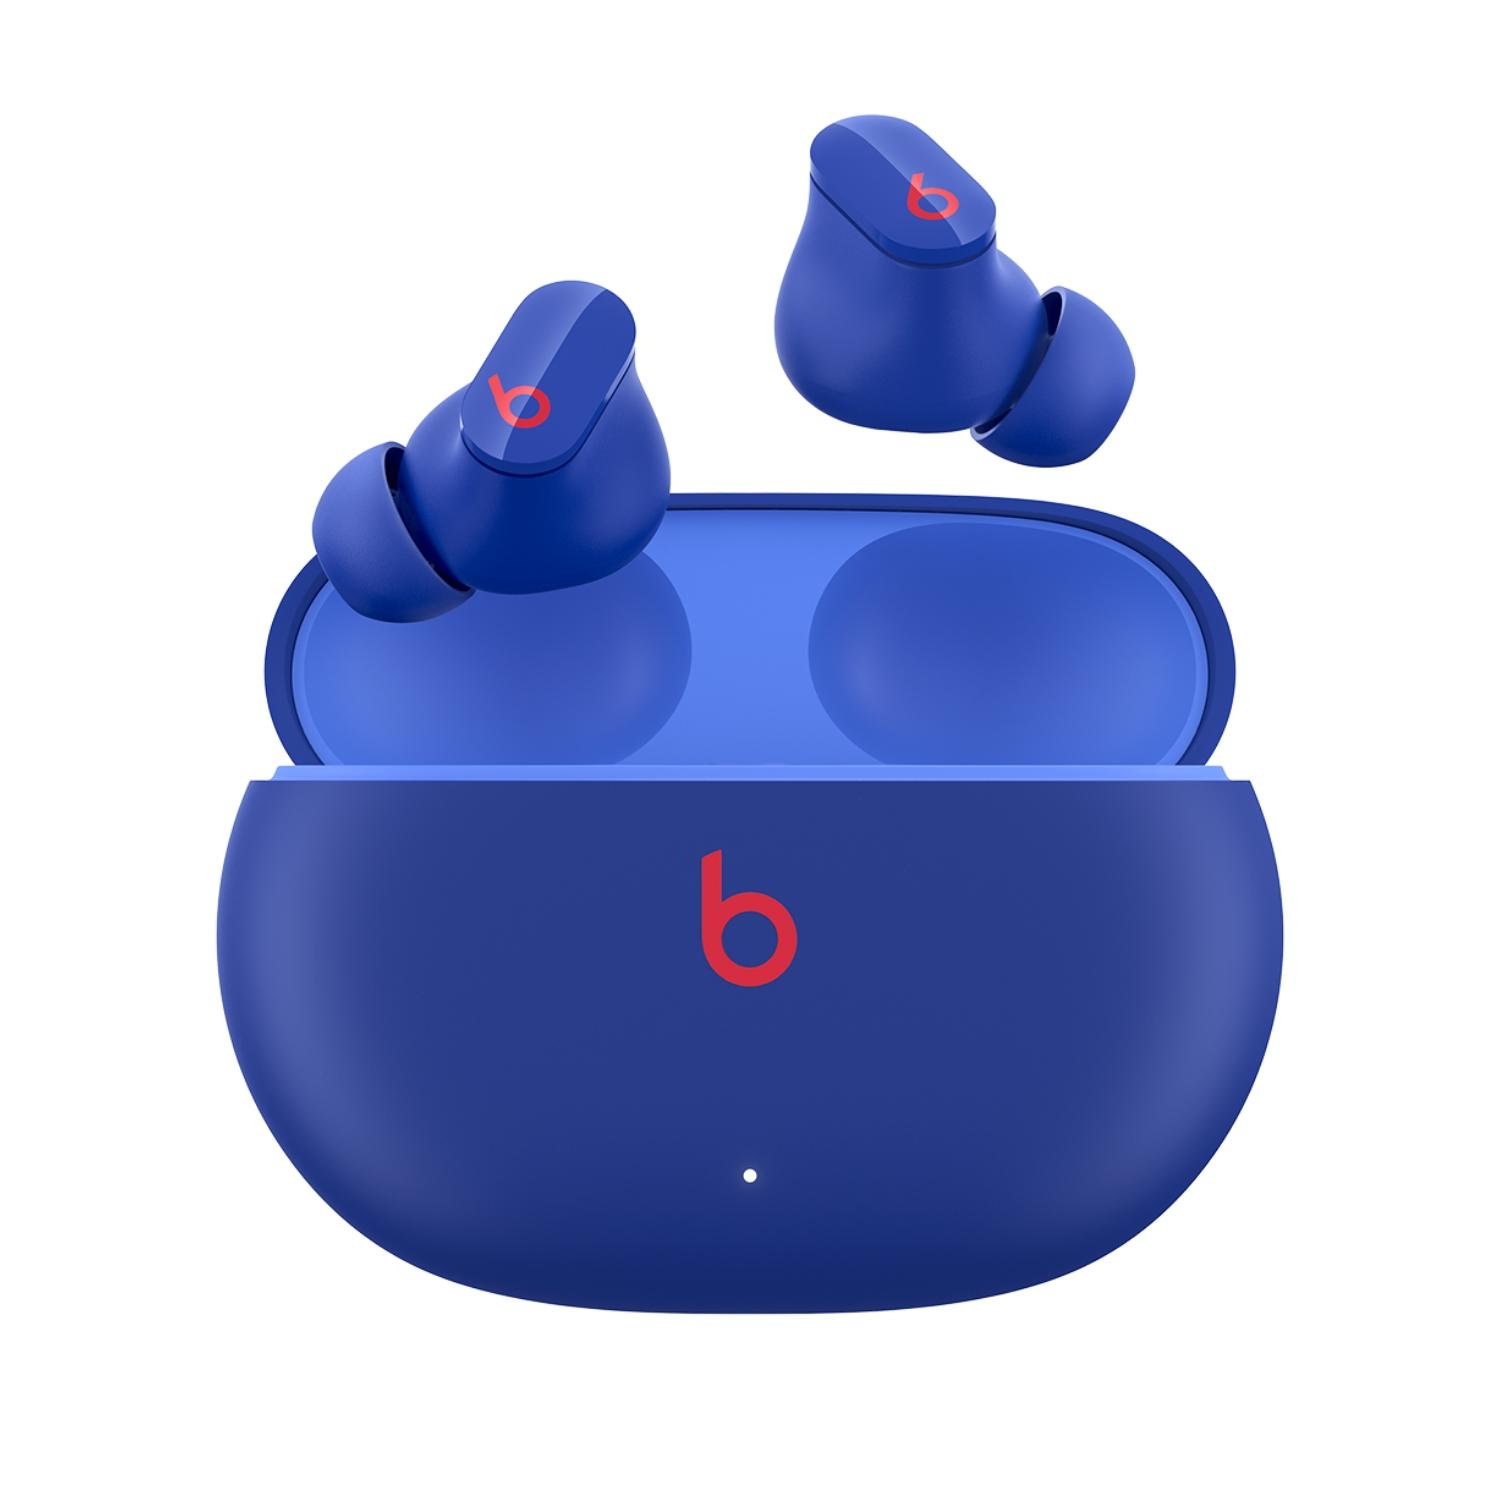 BEATS Studio Buds Wireless Bluetooth Noise-Cancelling Earbuds - Blue, Blue